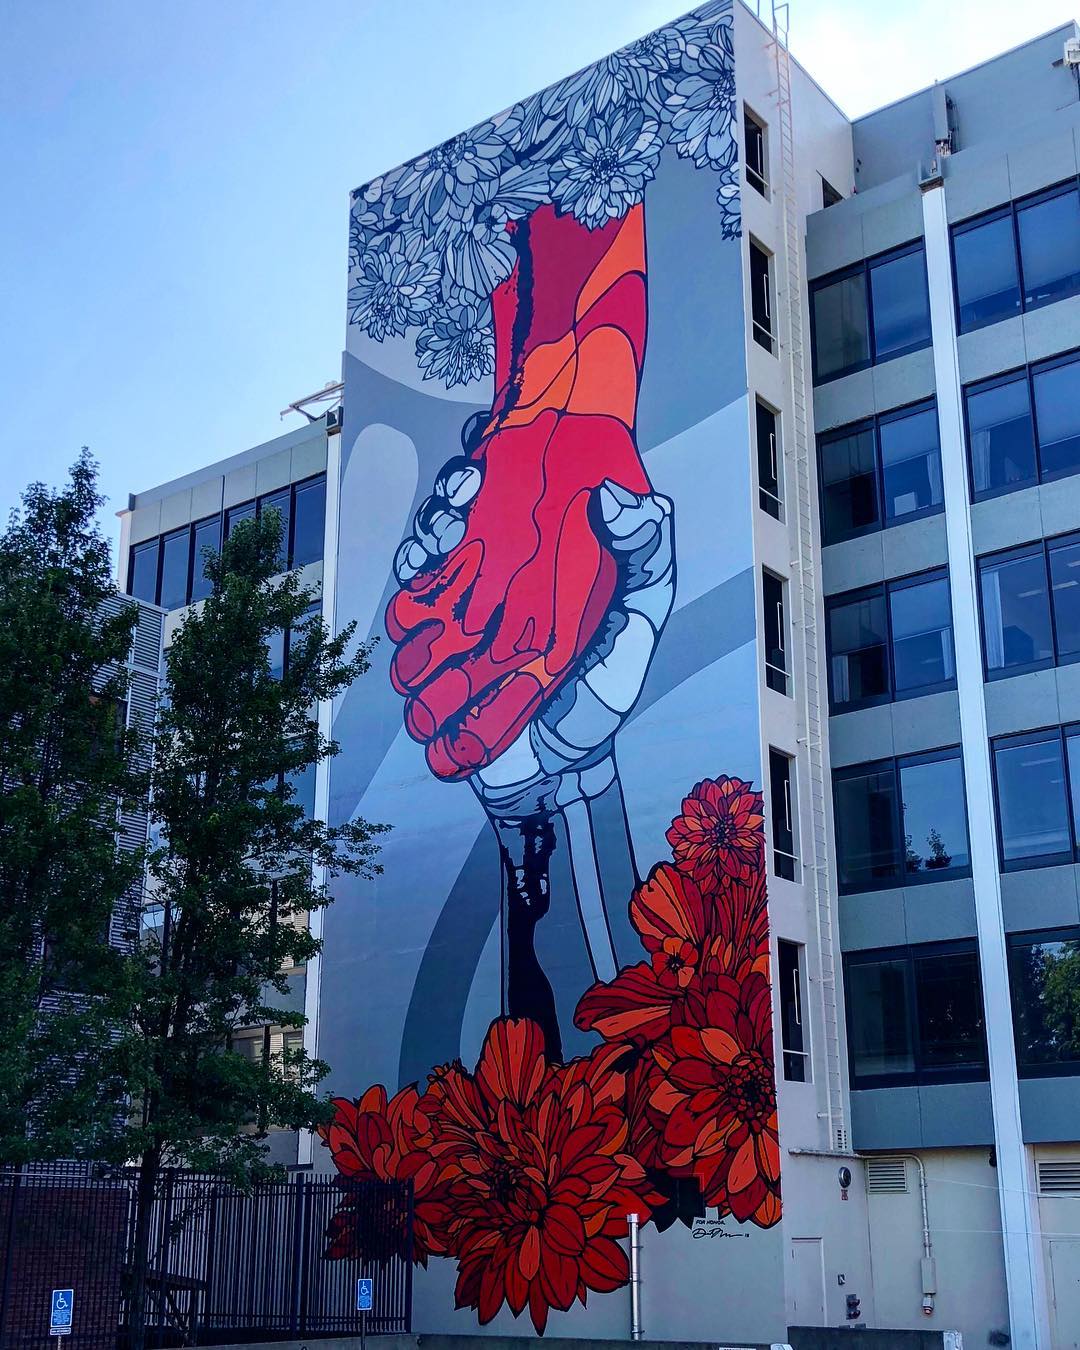 mural in Portland by artist David Flores.